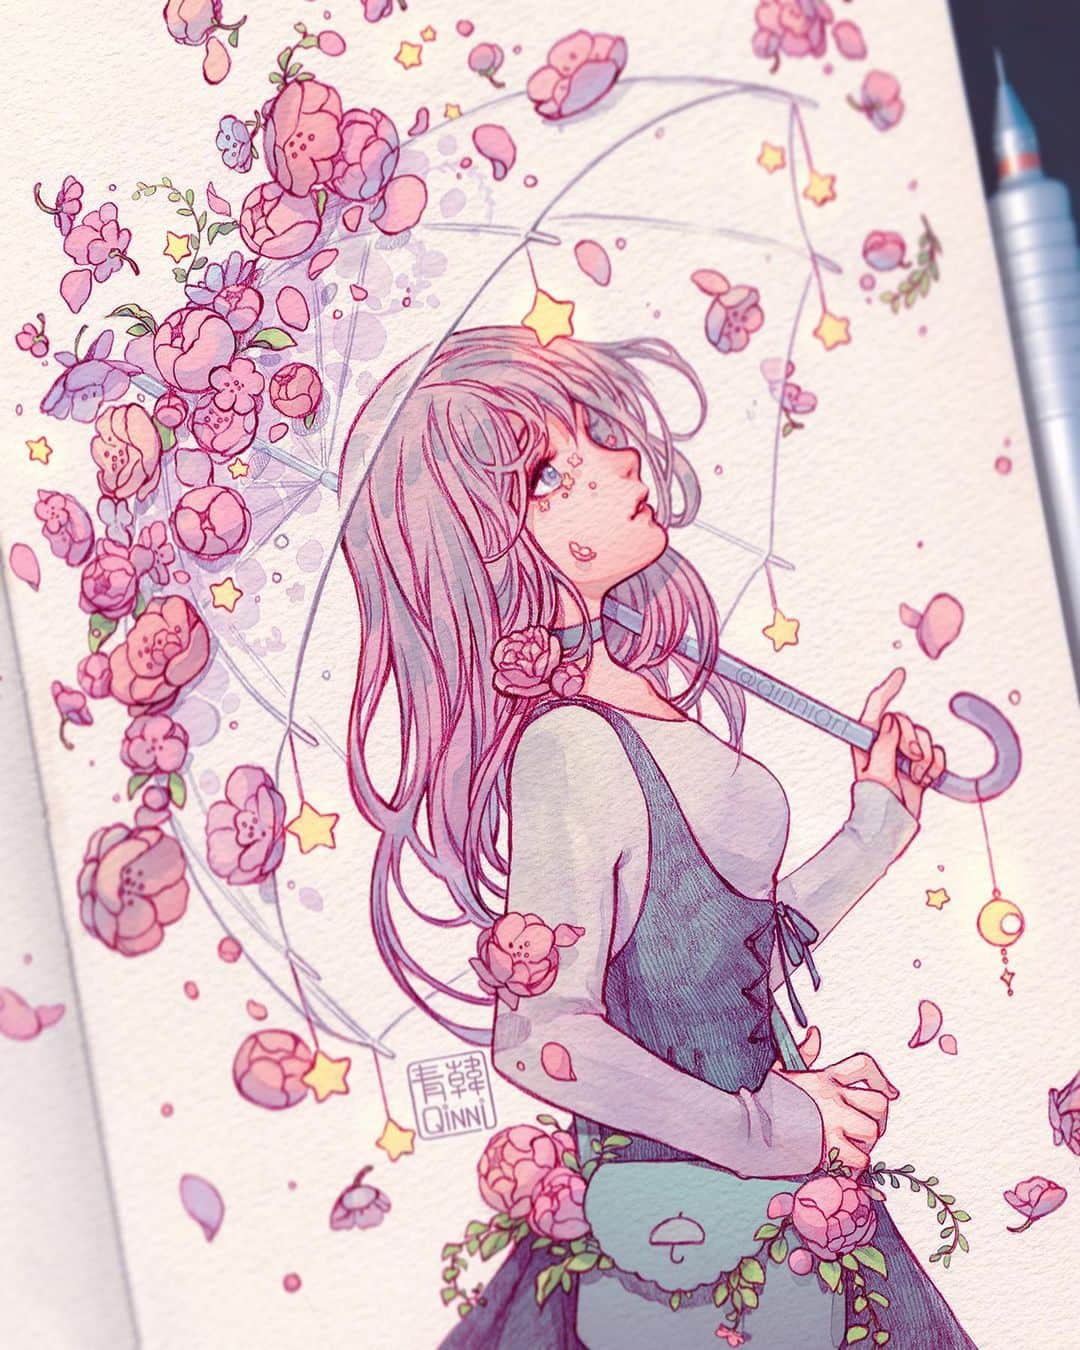 Qing Hanのインスタグラム：「April shower bring May flowers 🌸☔️🌸 • • • Tried a more, softer, pastel-y look. Let me know how you guys like it (=´∀｀)人(´∀｀=) ~ it's been a while, sorry @-@~ I spent quite a bit of time working on the book cover I did for @connieglynn, and because I'm still not doing the best health-wise, it took much longer than I expected 😅~ The more recent good news is that at least the scar tissue in my heart has stopped growing since I started trying this new medication I'm lab ratting for 😆😂! Though it's still blocking a lot of my heart arteries haha, so moving fast is still quite difficult. There's new meds my doctors want me to try, but they're crazy expensive, like $300 a month expensive @-@;;, on top of the meds I already need....So I kinda finally started a patreon. I'm not officially announcing it yet, I'm still on this bucket-list Japan trip; I do have some wips up for this though 😁~ nothing formal or extravagant, just gonna be a pay what ya want wip blog-y type of patreon (●°u°●)​ 」  Thanks for dropping by 😊 • • • • • #illustration #pencil #umbrella #flowers」